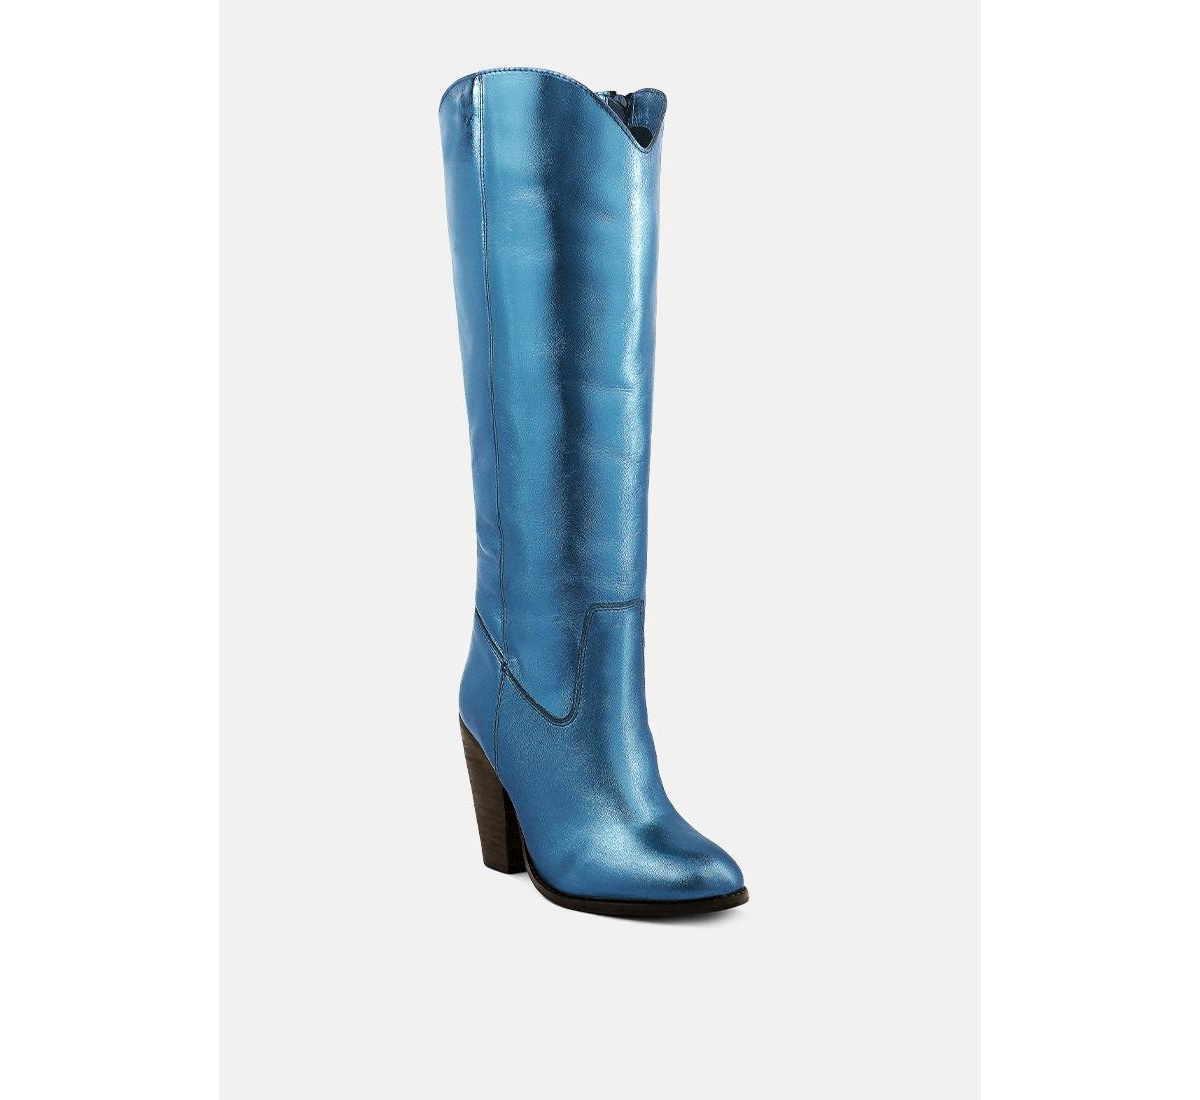 Great-storm Womens Suede Leather Calf Boots - Blue